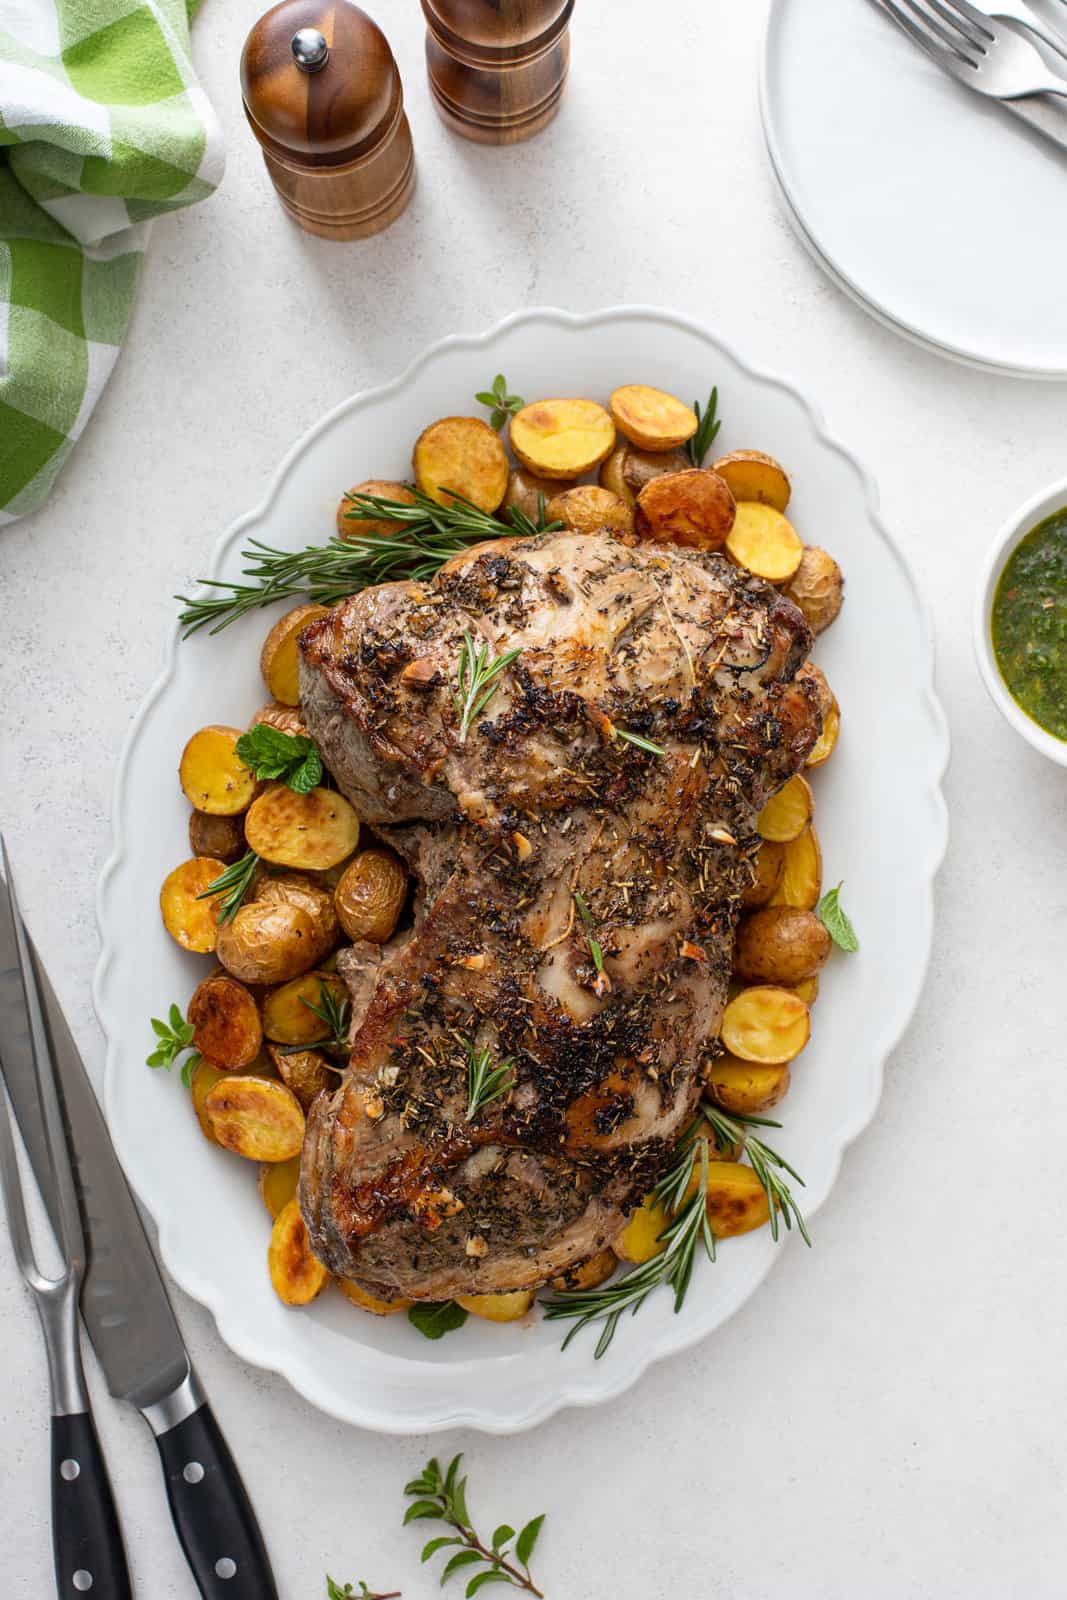 Overhead view of roasted boneless leg of lamb surrounded by roasted potatoes on a white platter.